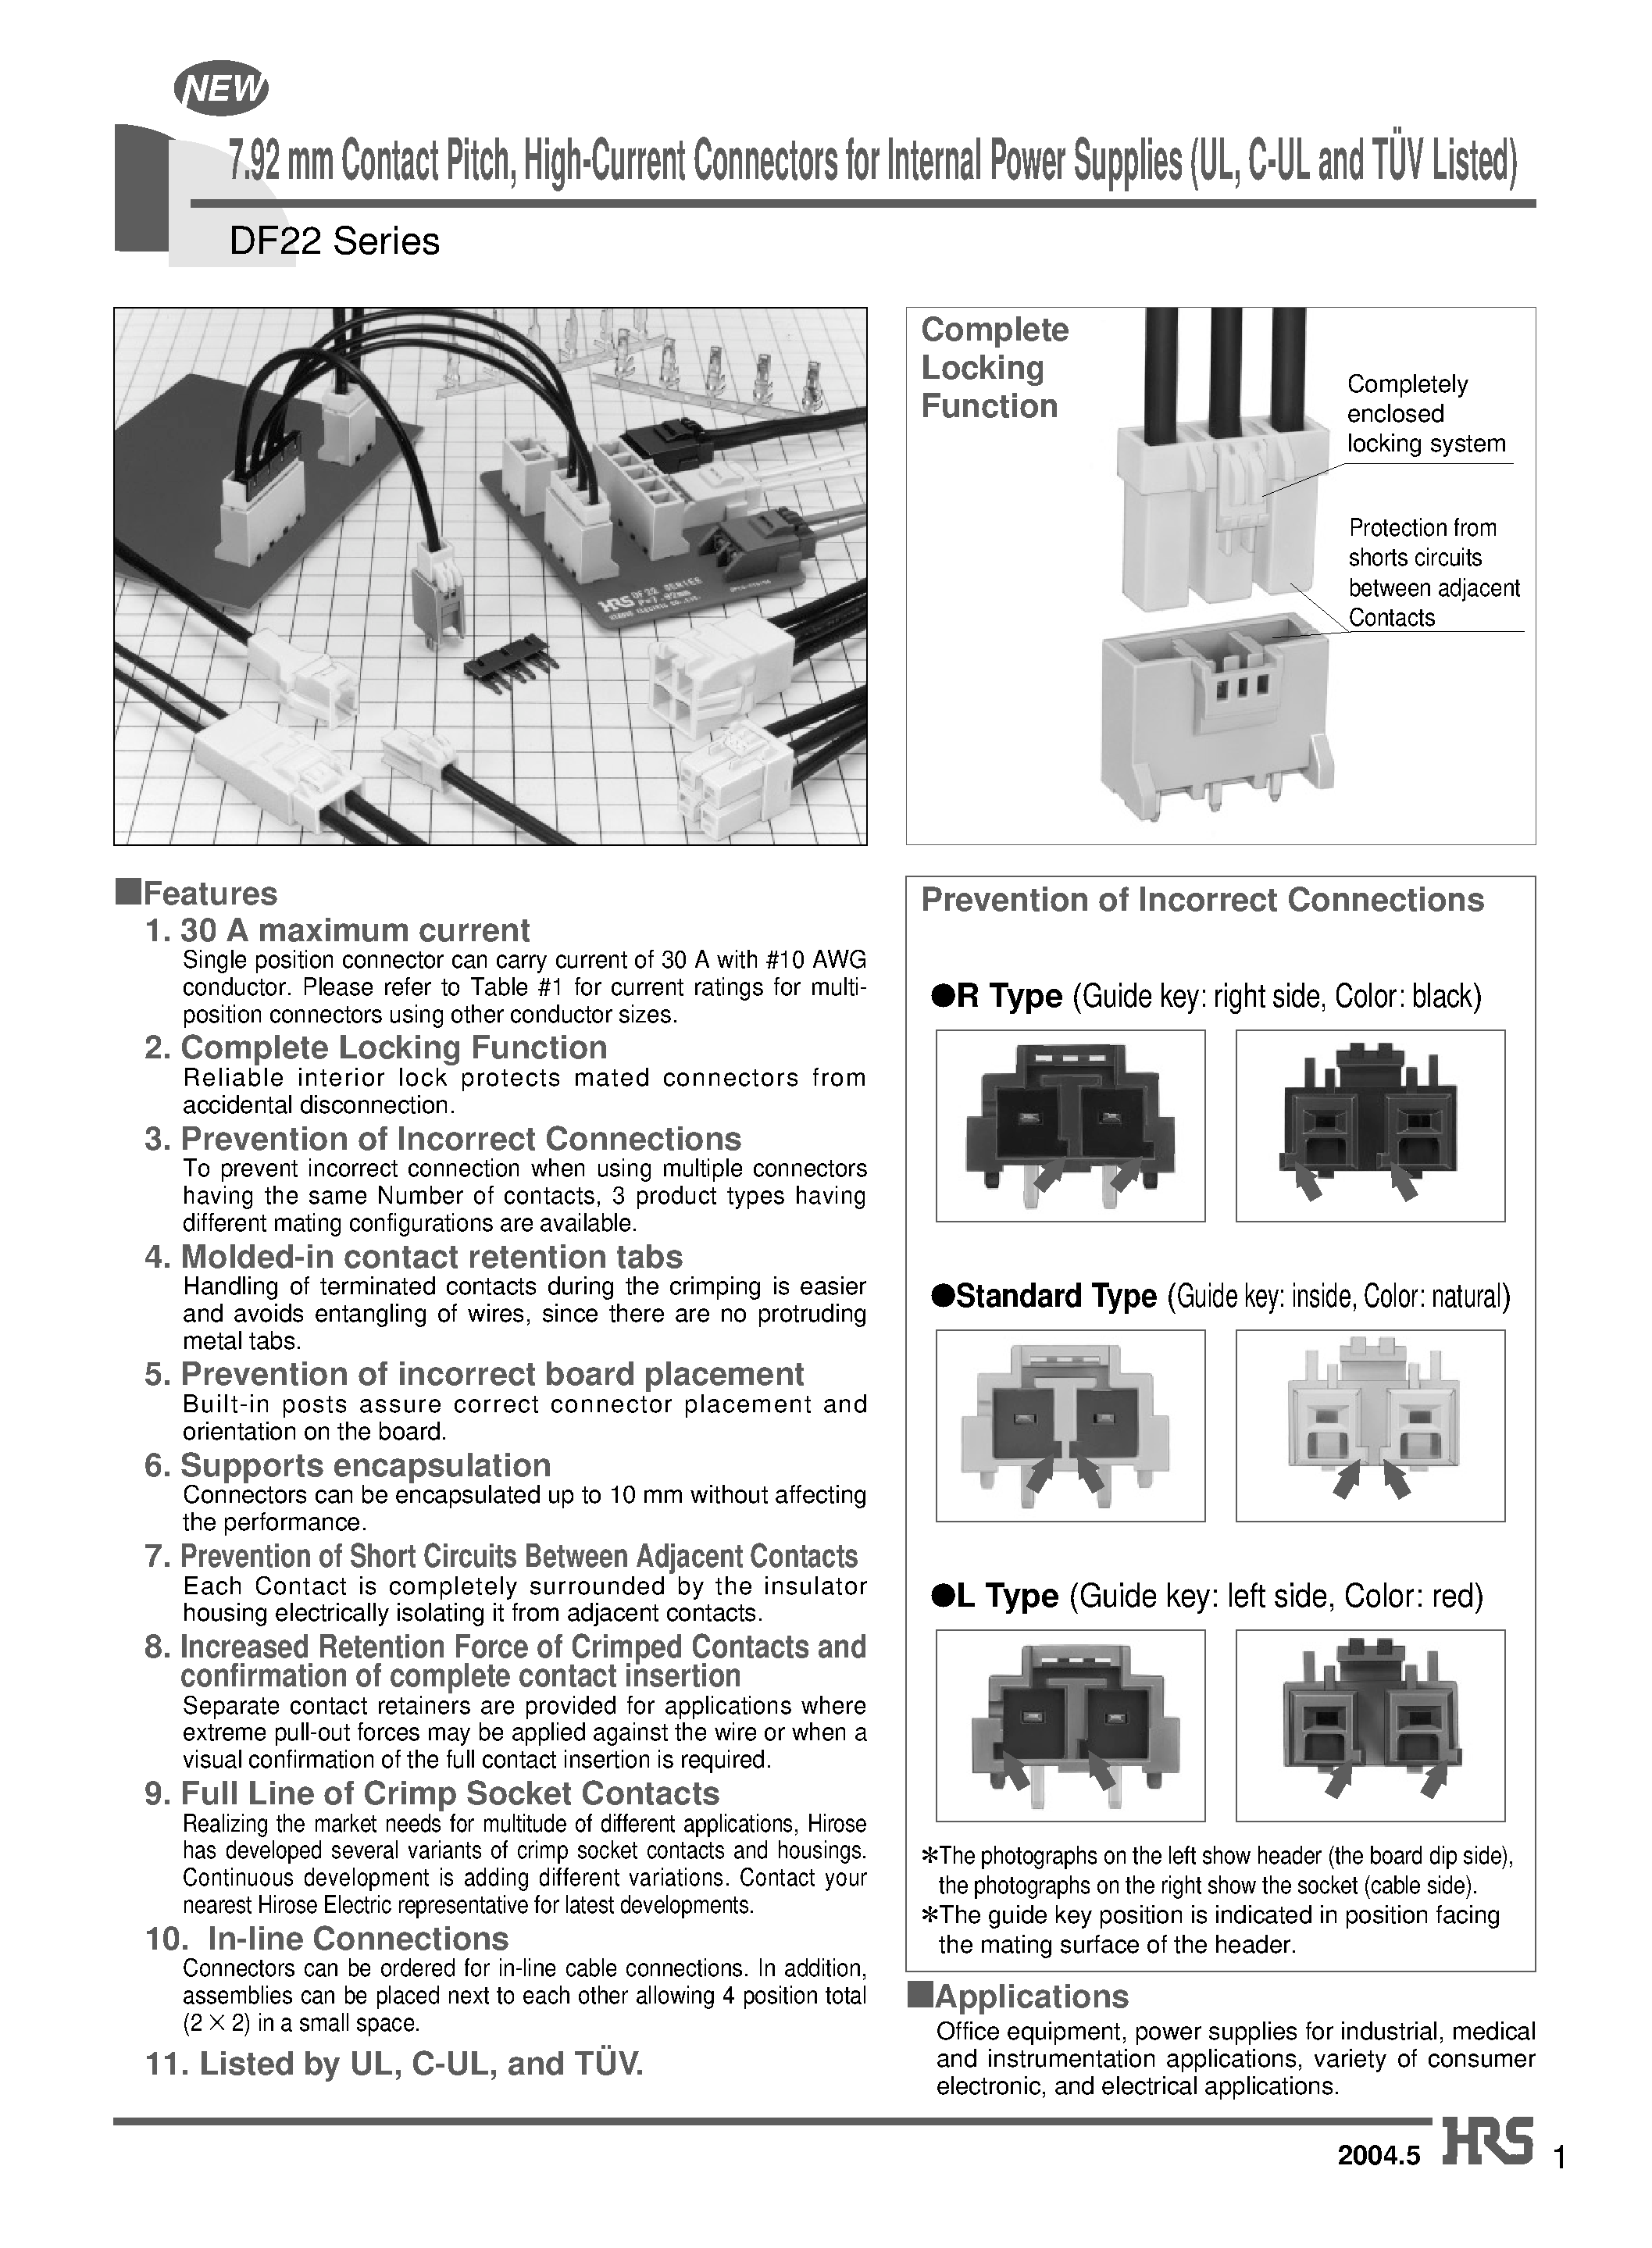 Datasheet DF22-1P-7.92DSA - 7.92 mm Contact Pitch/ High-Current Connectors for Internal Power Supplies (UL/ C-UL and TUV Listed) page 1